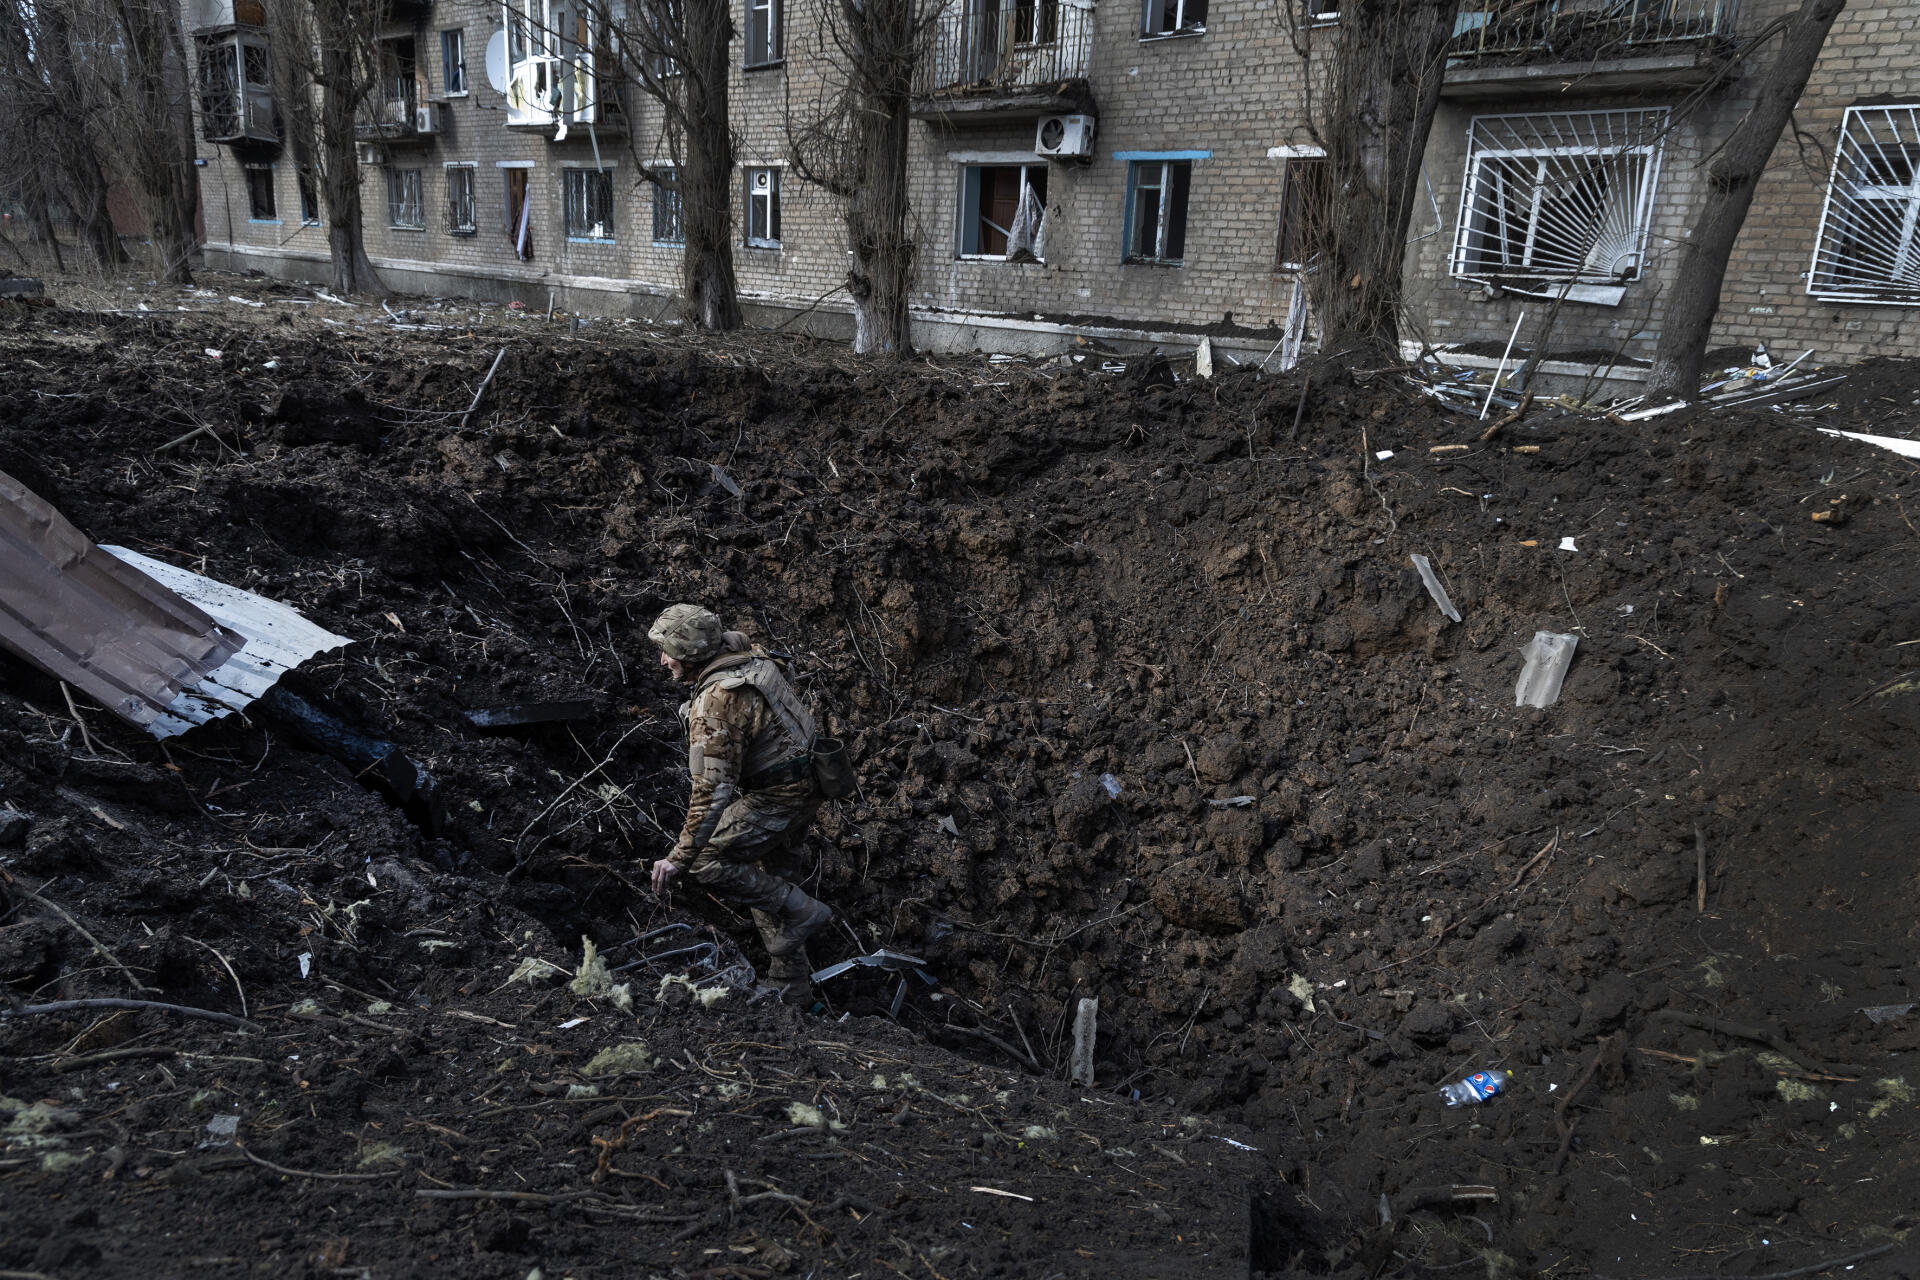 A Ukrainian soldier of the Kyiv regiment in the crater caused by a Kh-22 missile the previous day, in the center of Avdiivka, Ukraine, March 6, 2023.